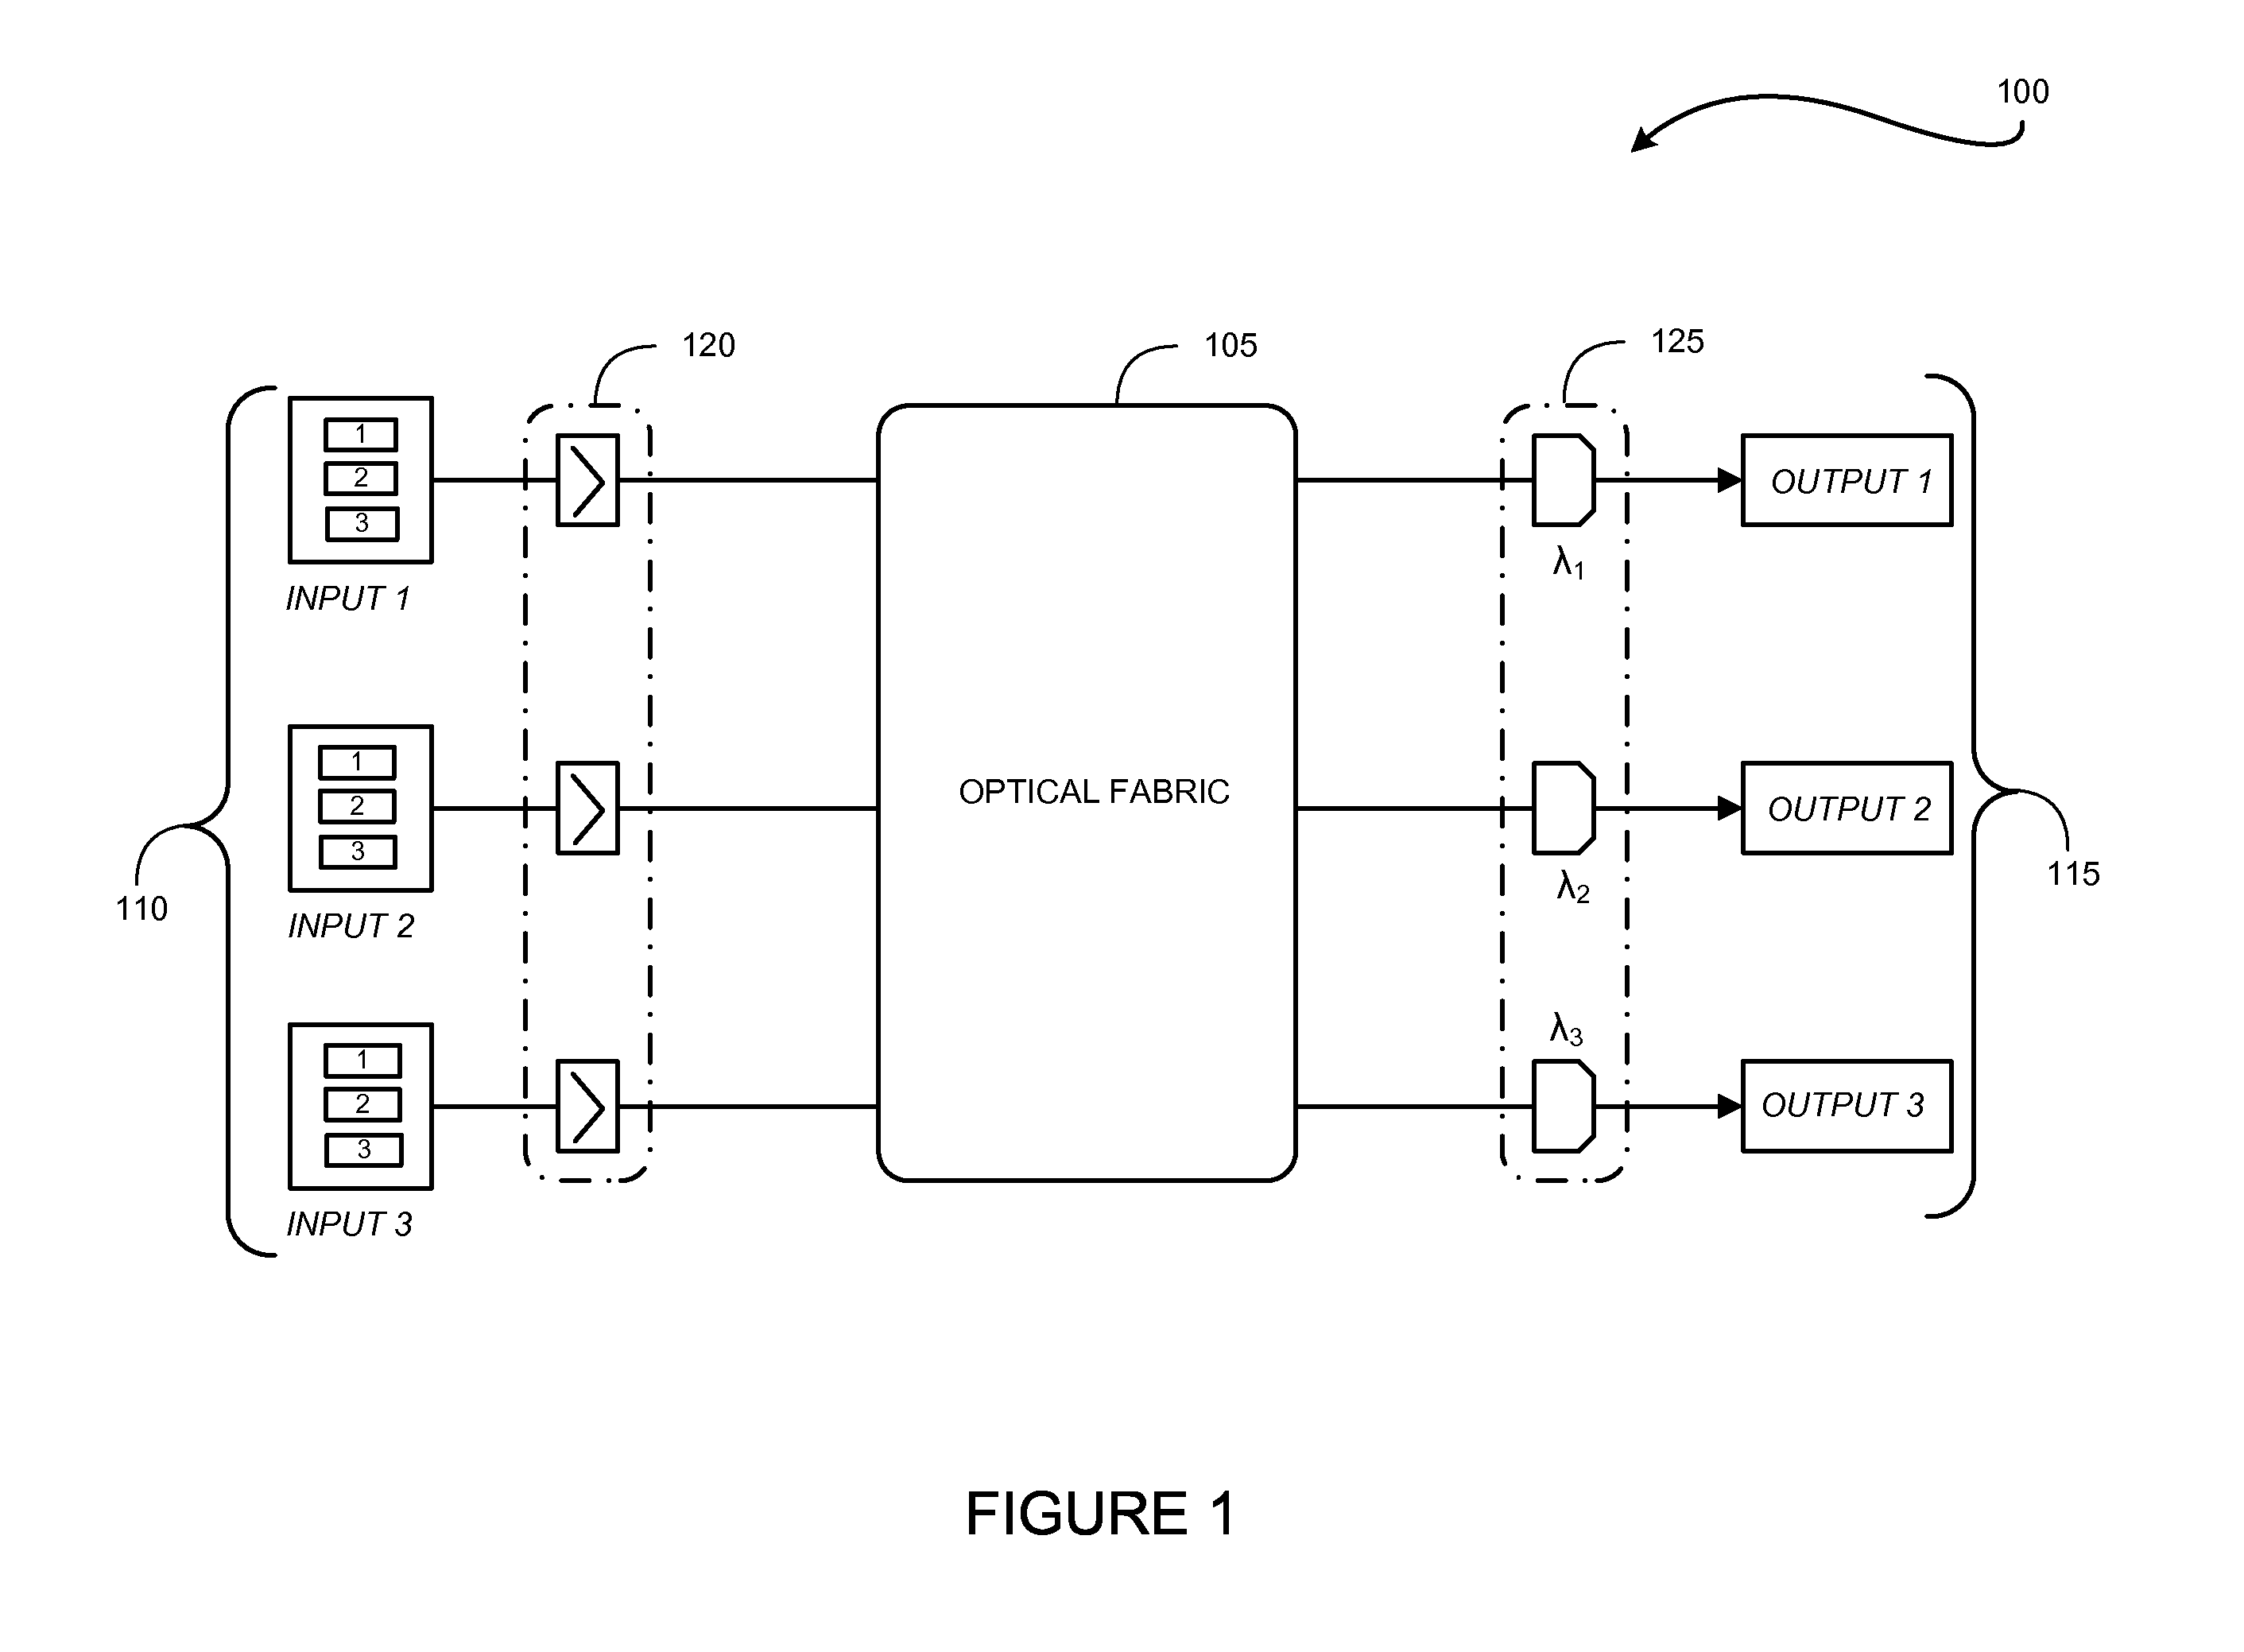 Distributed scheduling for an optical switch